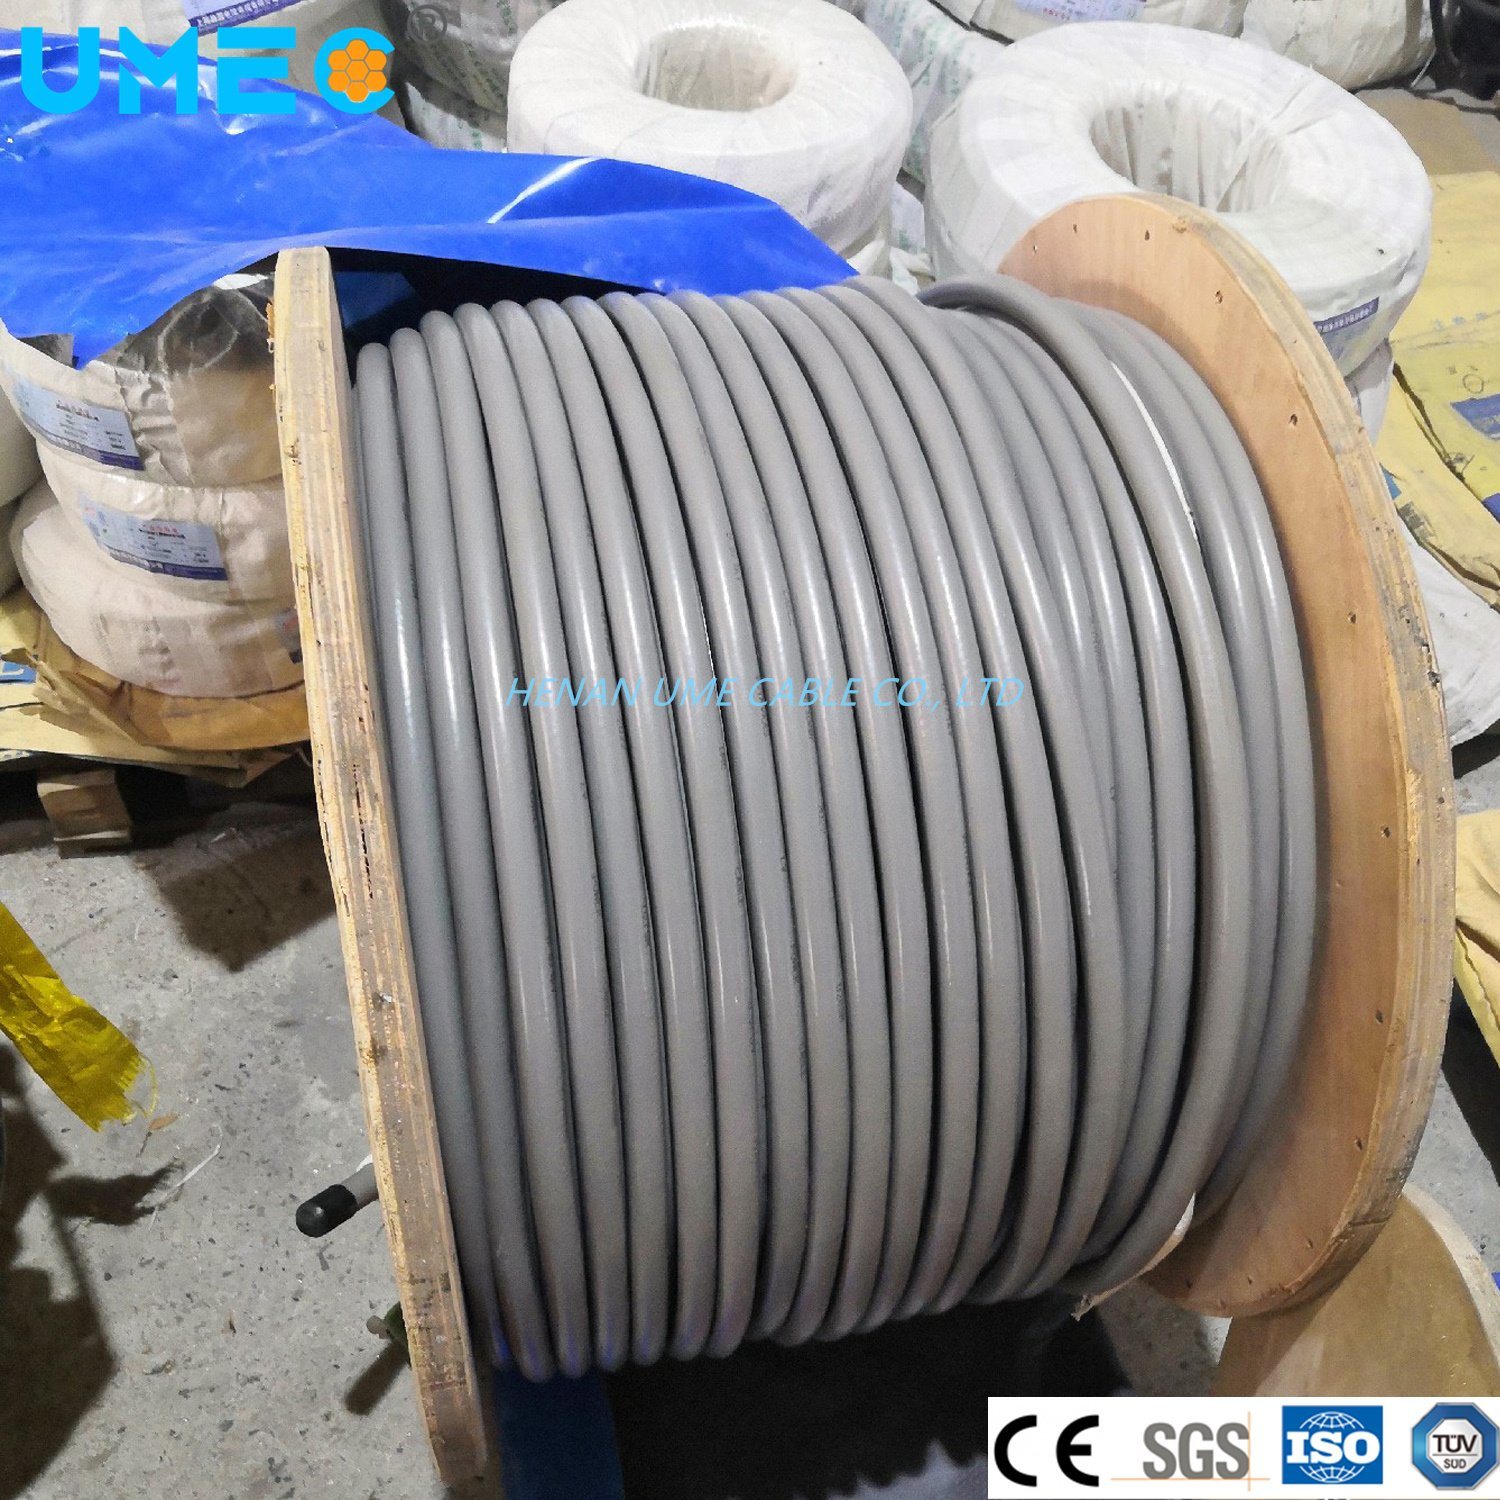 0.6/1 Kv XLPE Insulated Galvanised Steel Wire Braided Power Cable 2X2.5mm2 2X4mm2 4X10mm2 Electrical Cable